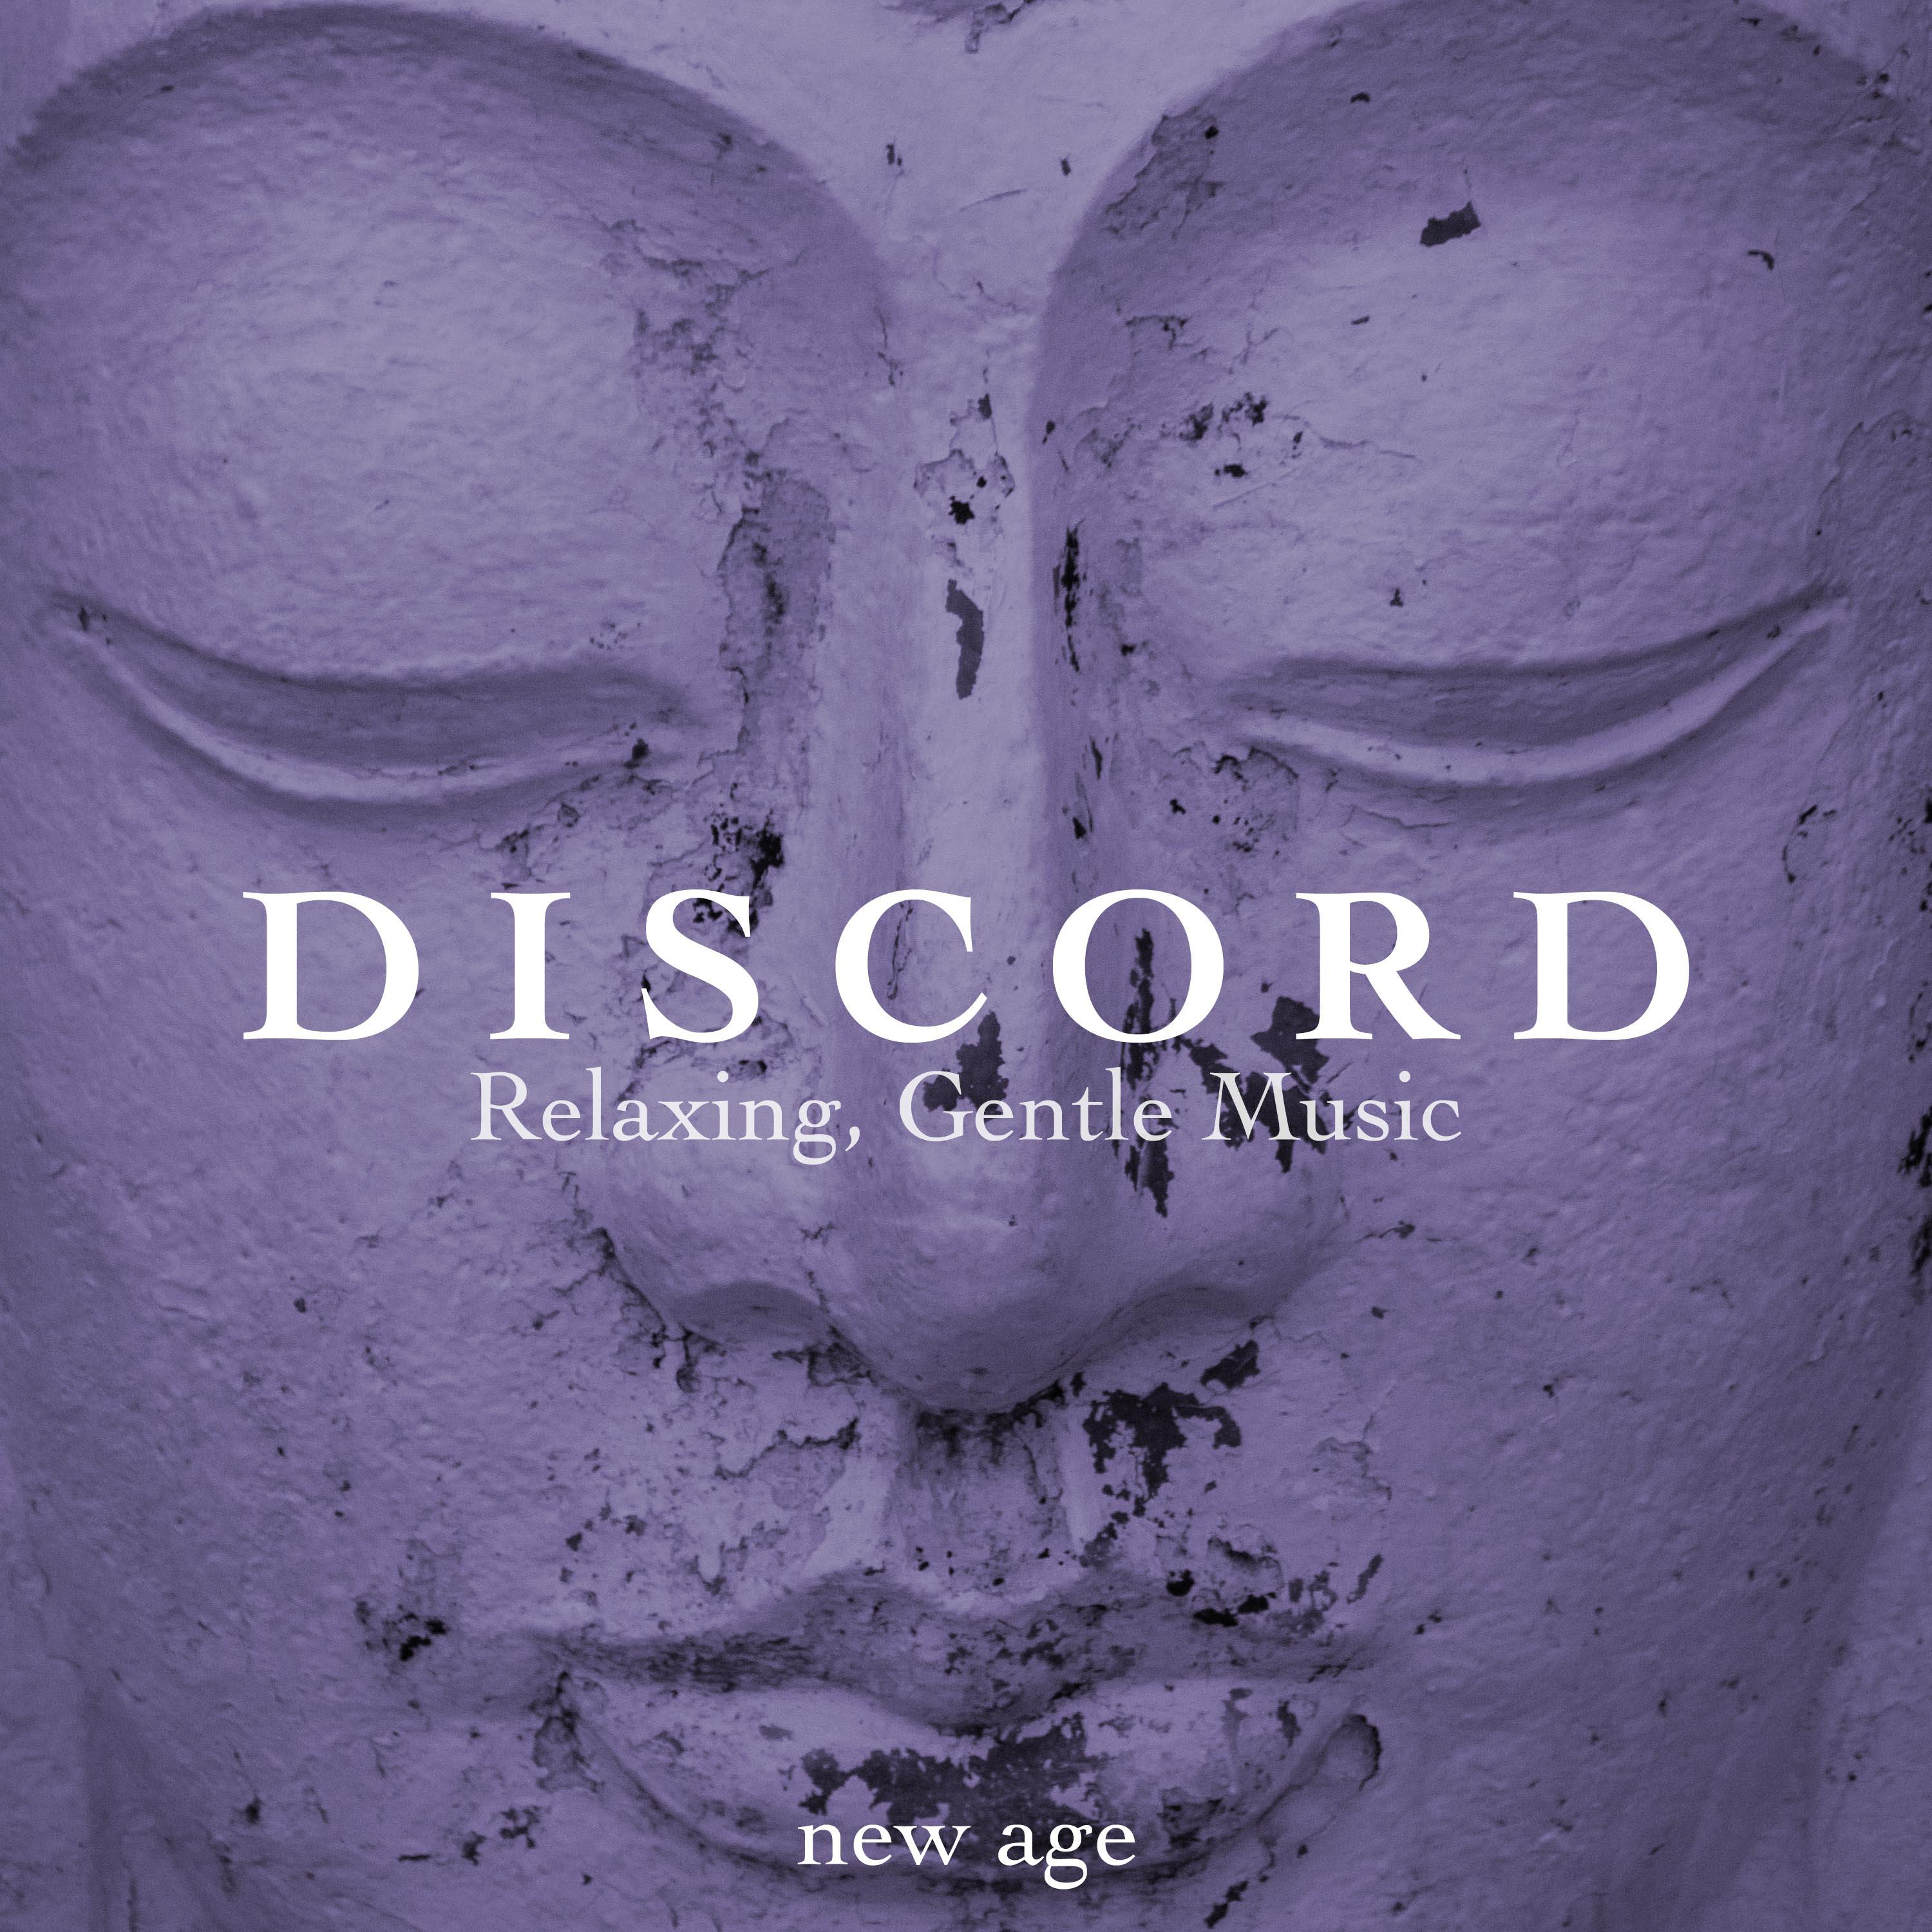 Discord - Relaxing, Gentle Music to Relieve Stress, Anger, Grief, Nature Sounds and Piano Music